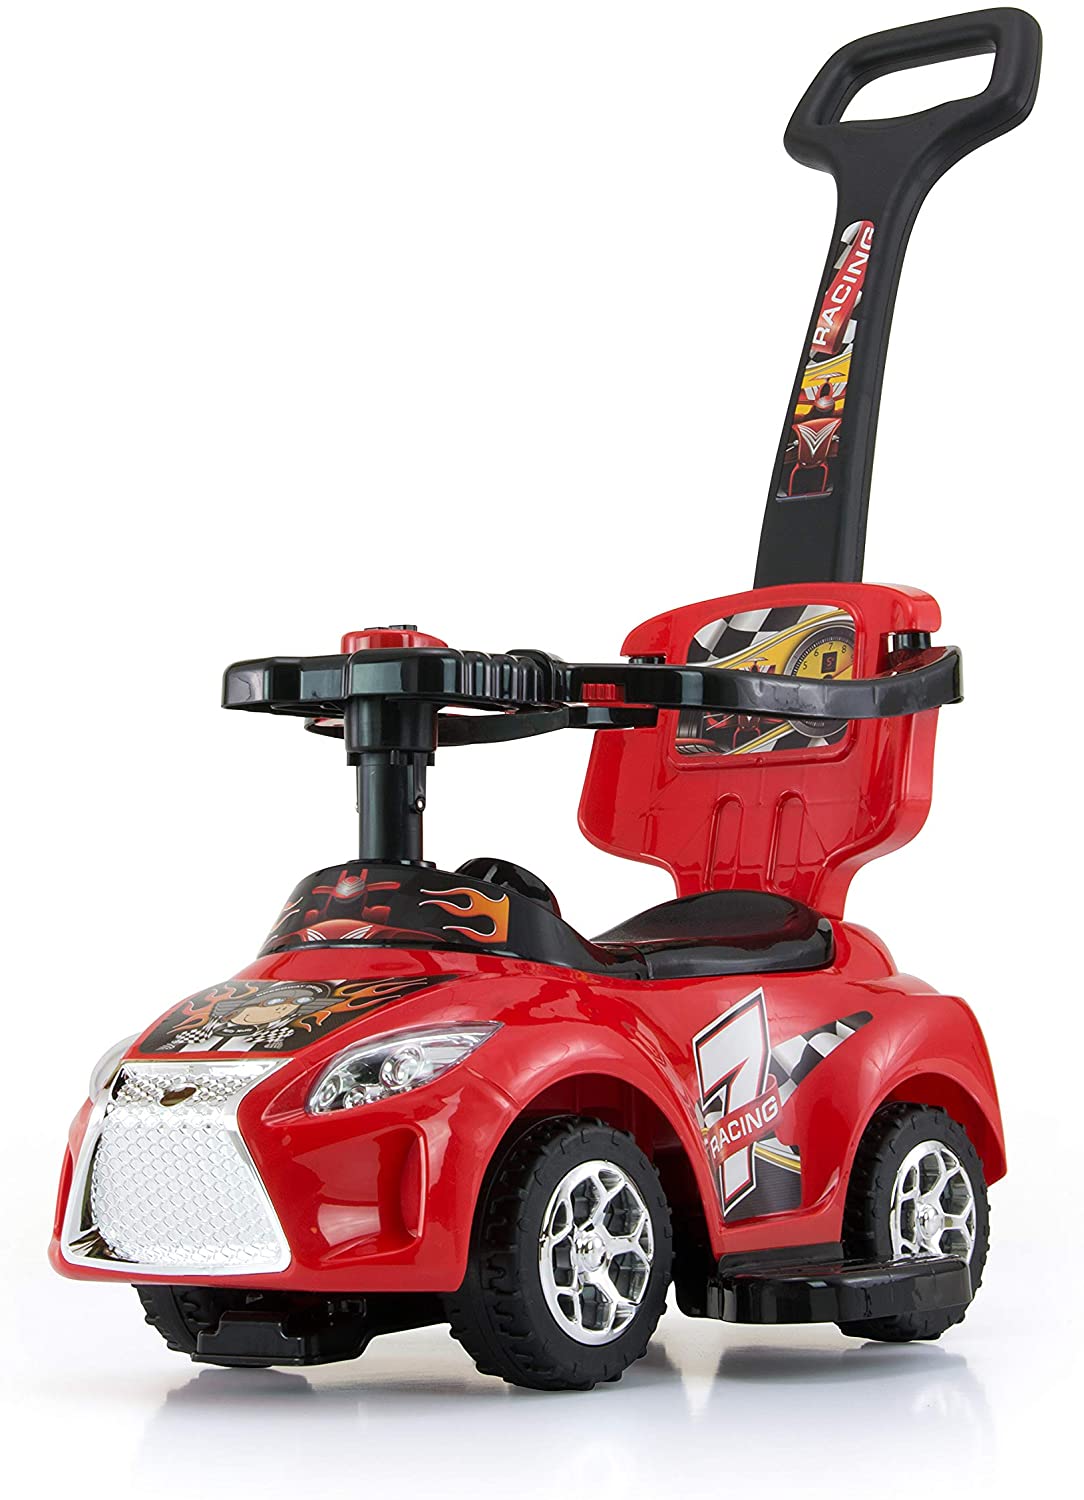 Milly Mally 5901761122275 – 3 W 1 Non-Slip Car – Red